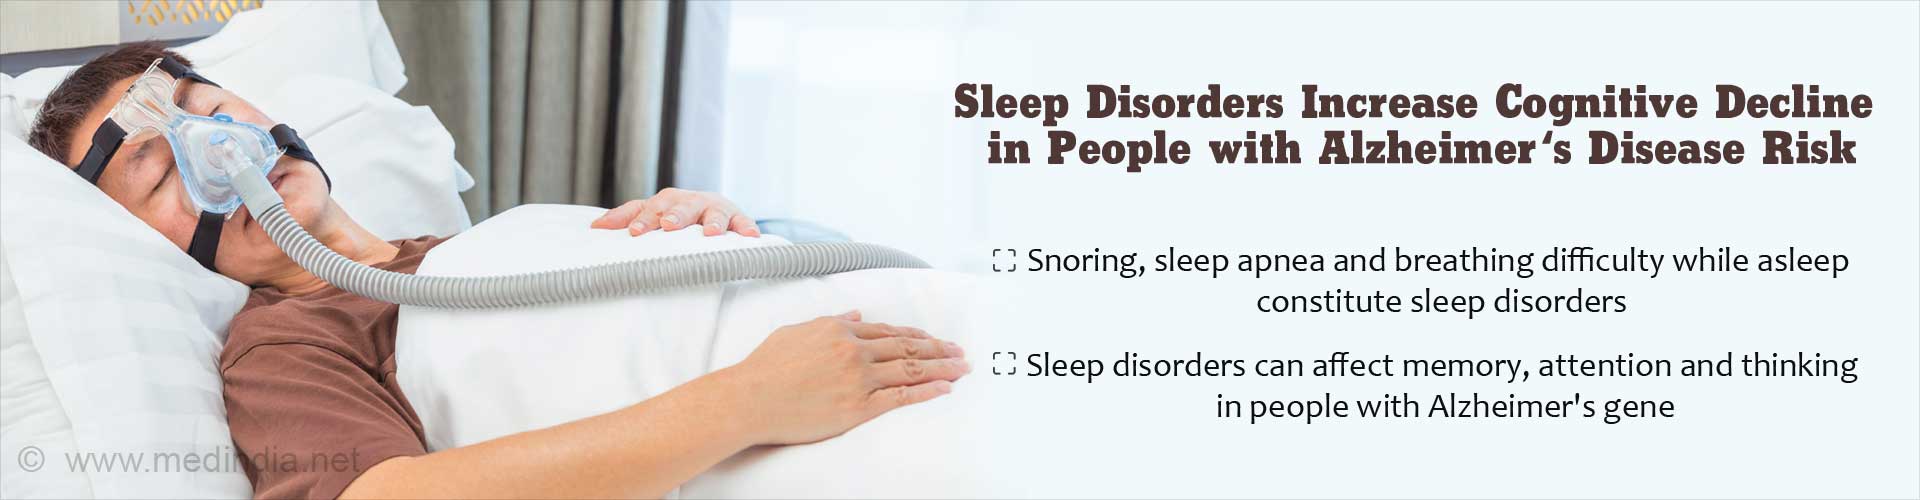 Sleep Disorders Increase Cognitive Decline in People with Alzheimer's Disease Risk
- Snoring, sleep apnea and breathing difficulty while asleep constitute sleep disorders
- Sleep disorders can affect memory, attention and thinking in people with Alzheimer's gene